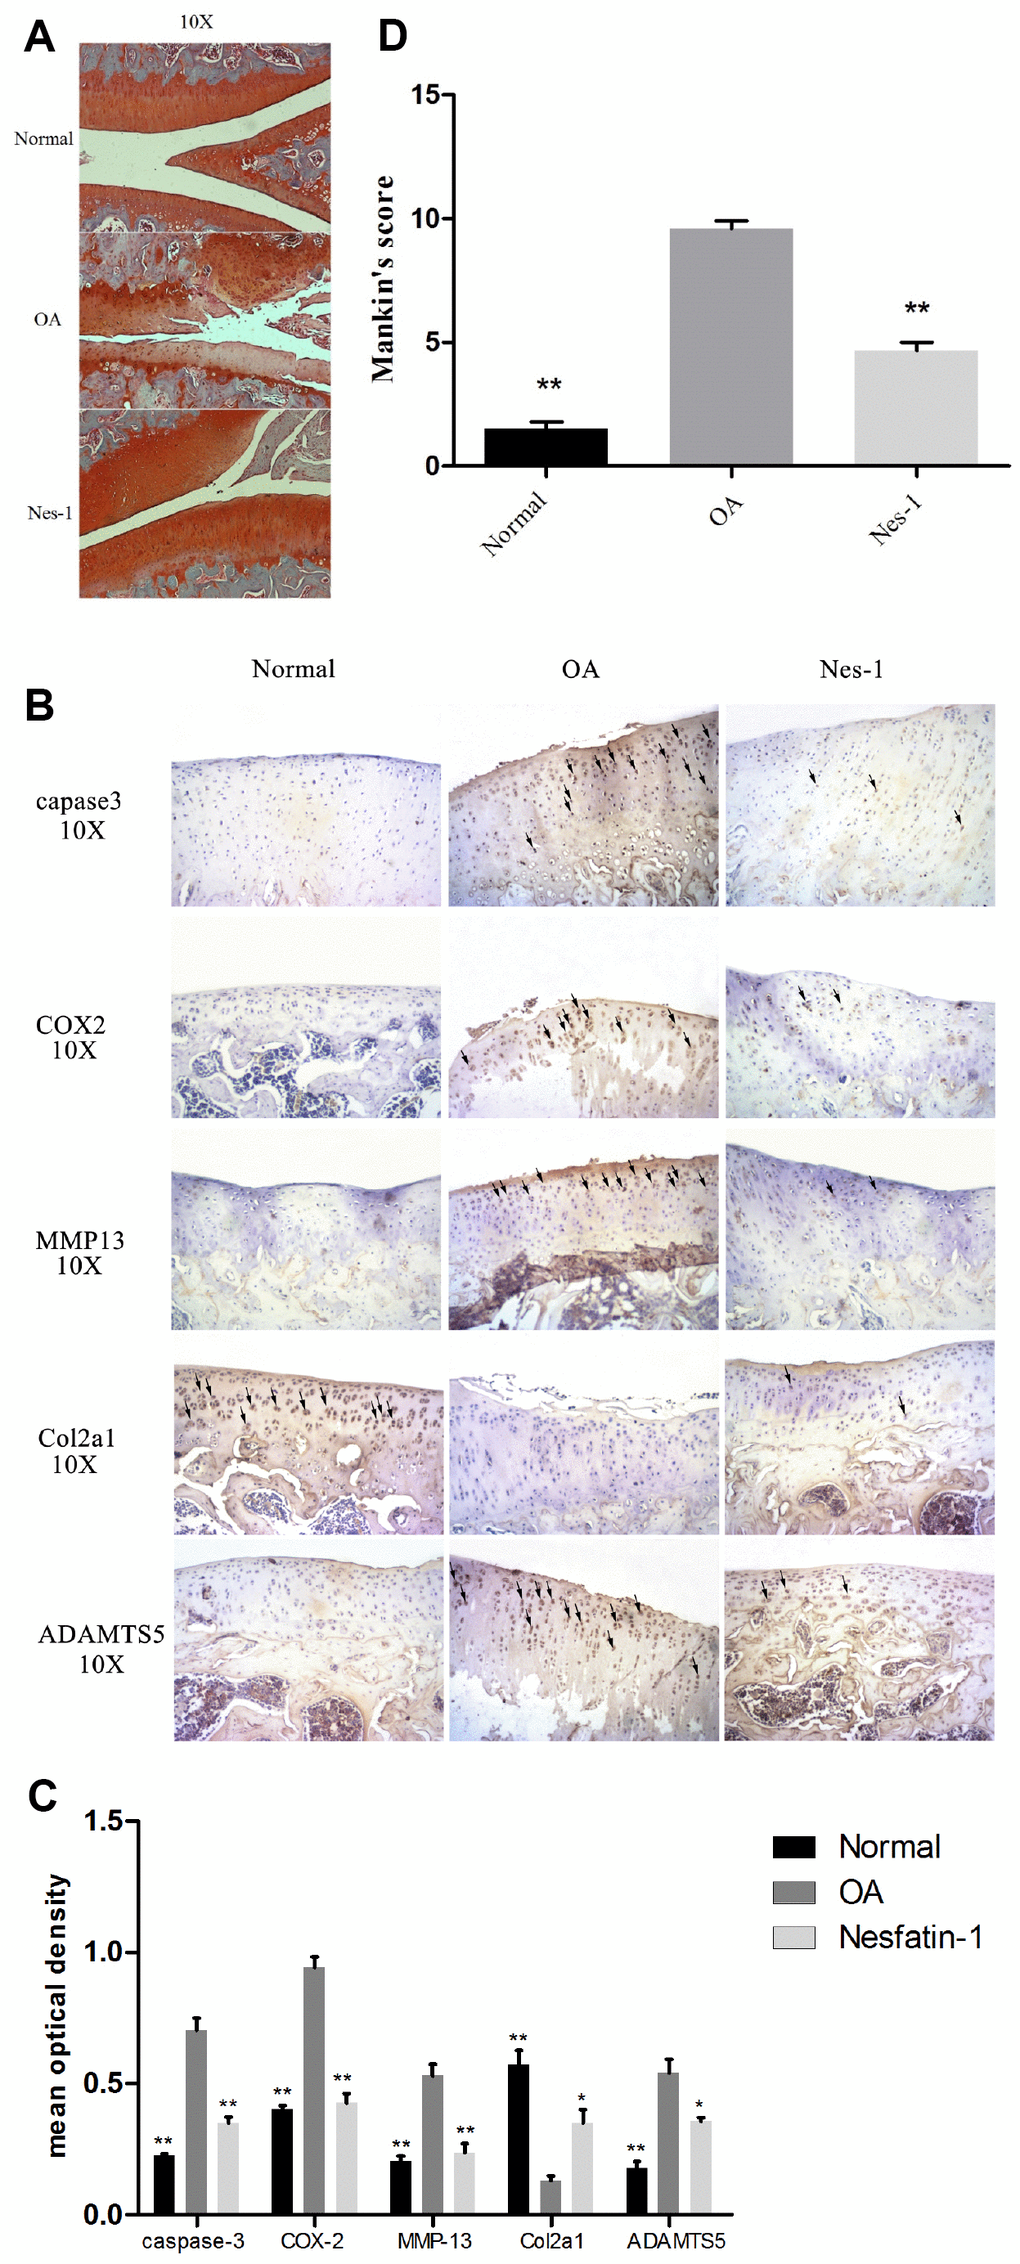 Specimen evaluation in animal models. (A, D) Representative images of safranin-O-stained rat knee joint sections with different treatments and the related Mankin scores of the three groups. Scale bar=200 μm. Data represent the mean ± SD (n = 30) and were analyzed by one-way analysis of variance followed by Tukey's post hoc test. ** p B) Representative immunohistochemistry images against MMP-13, COX-2, caspase-3, ADAMTS5, and Col2a1. Scale bar=200 μm; (C) Quantitative optical density analysis of immunohistochemistry for the different groups. Data represent the mean ± SD (n = 30) and were analyzed by one-way analysis of variance followed by Tukey's post hoc test. **p 